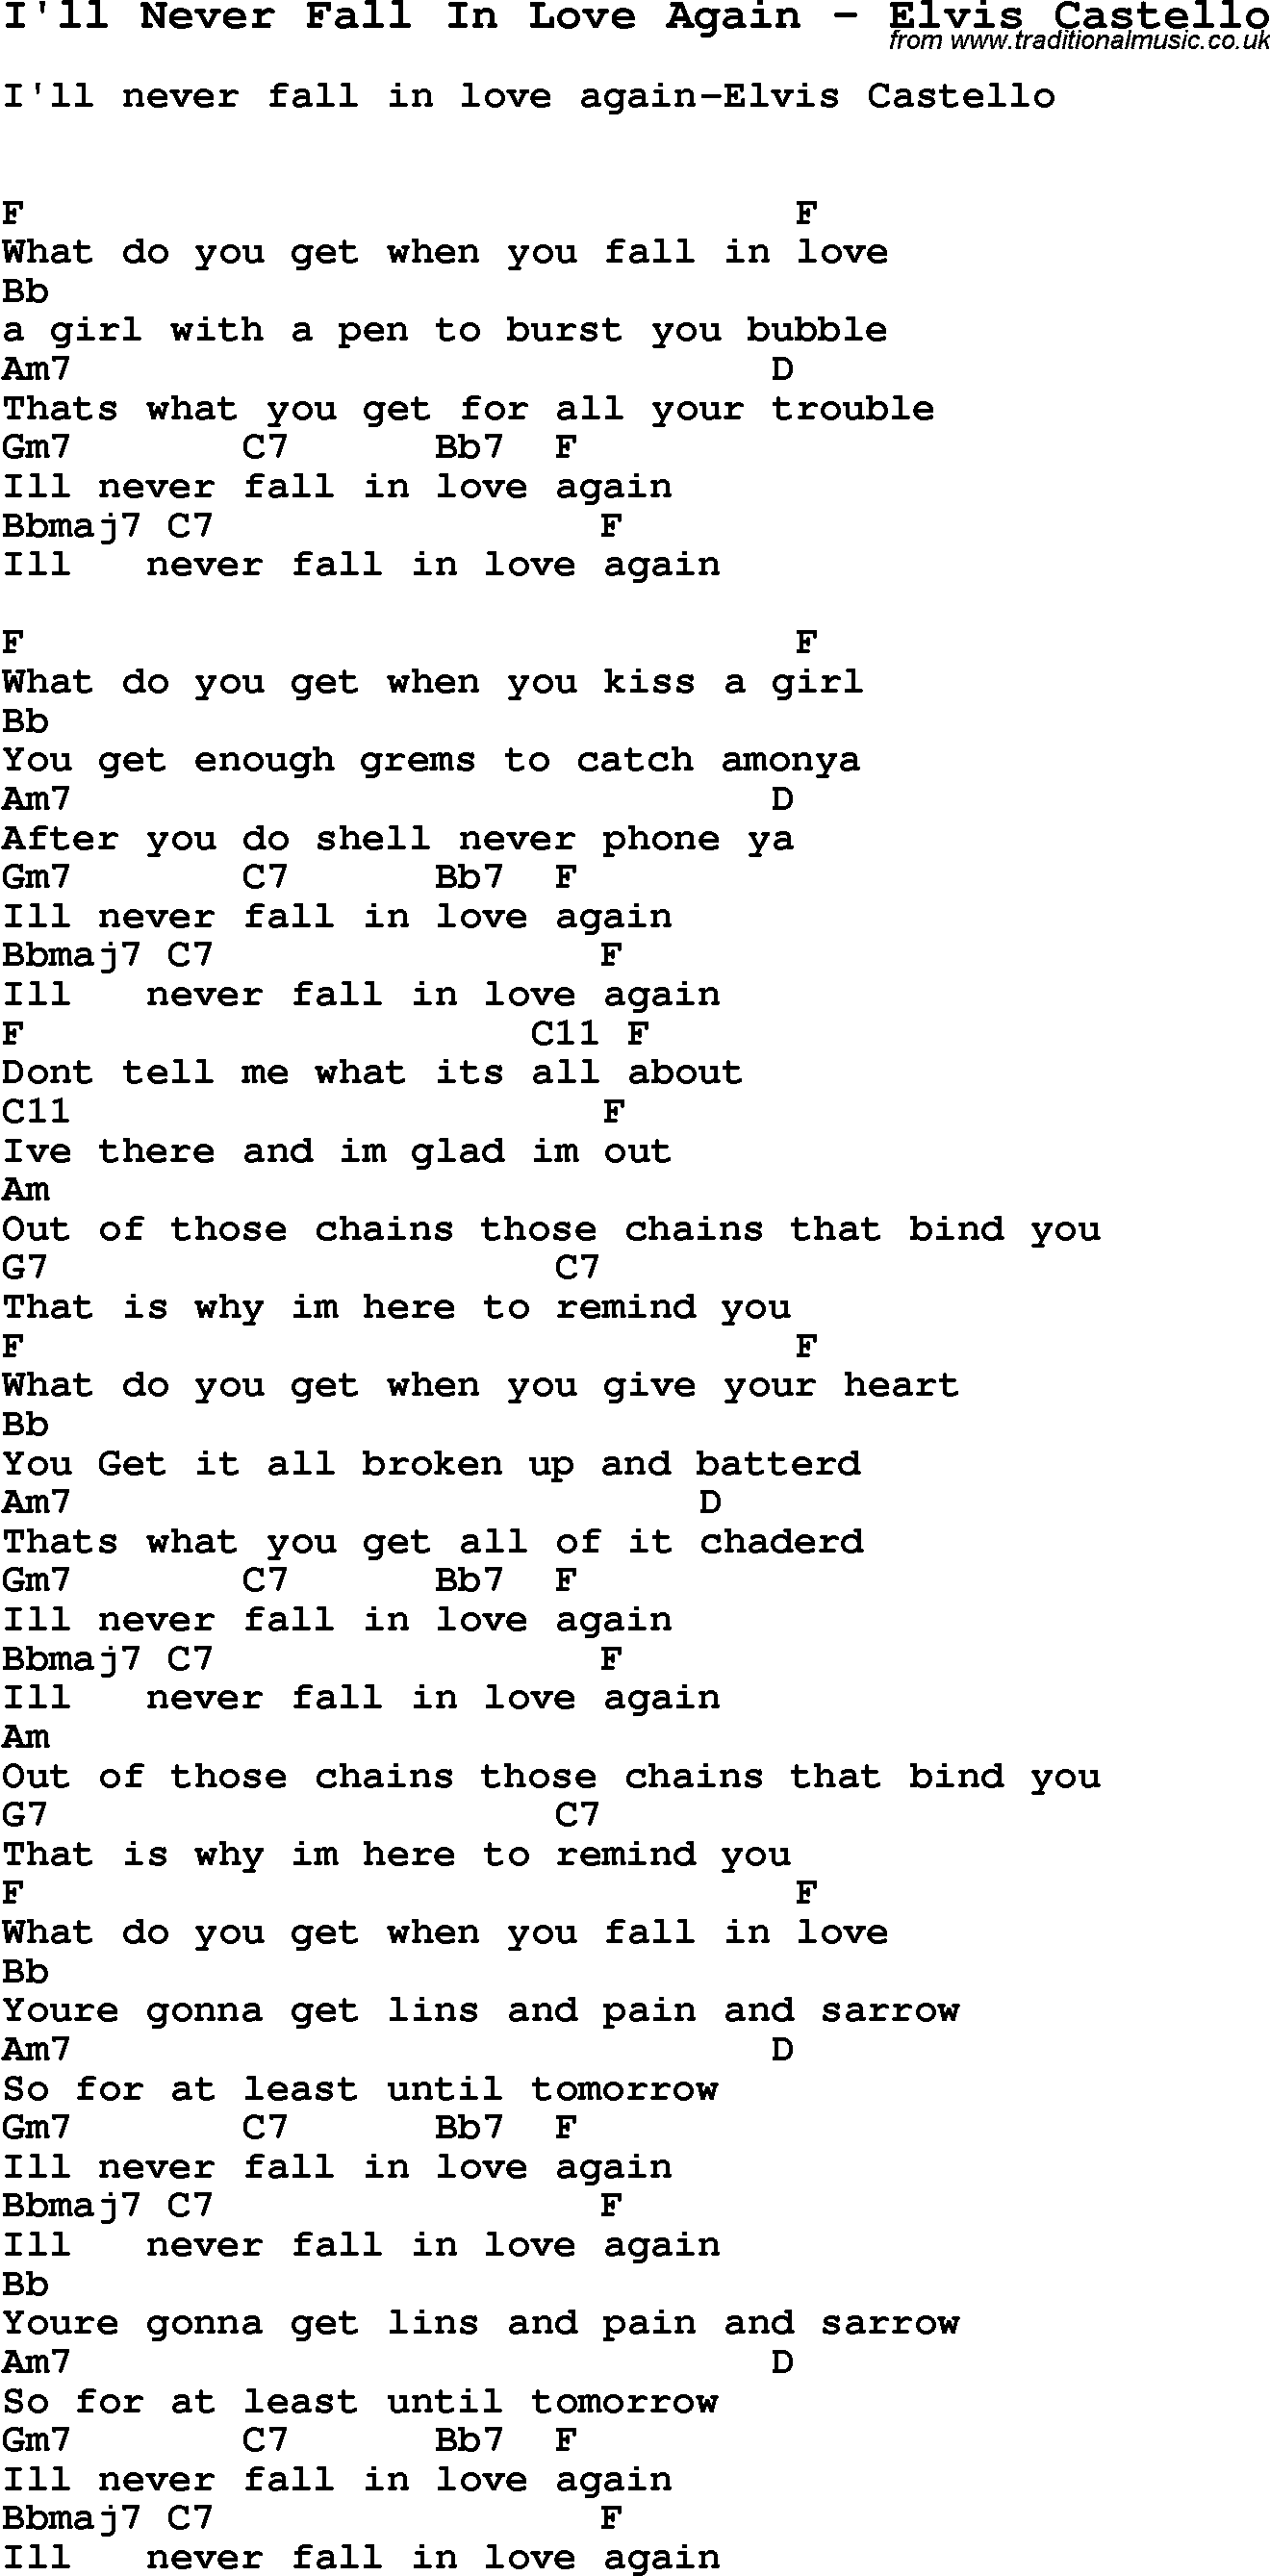 Song I'll Never Fall In Love Again by Elvis Castello, with lyrics for vocal performance and accompaniment chords for Ukulele, Guitar Banjo etc.